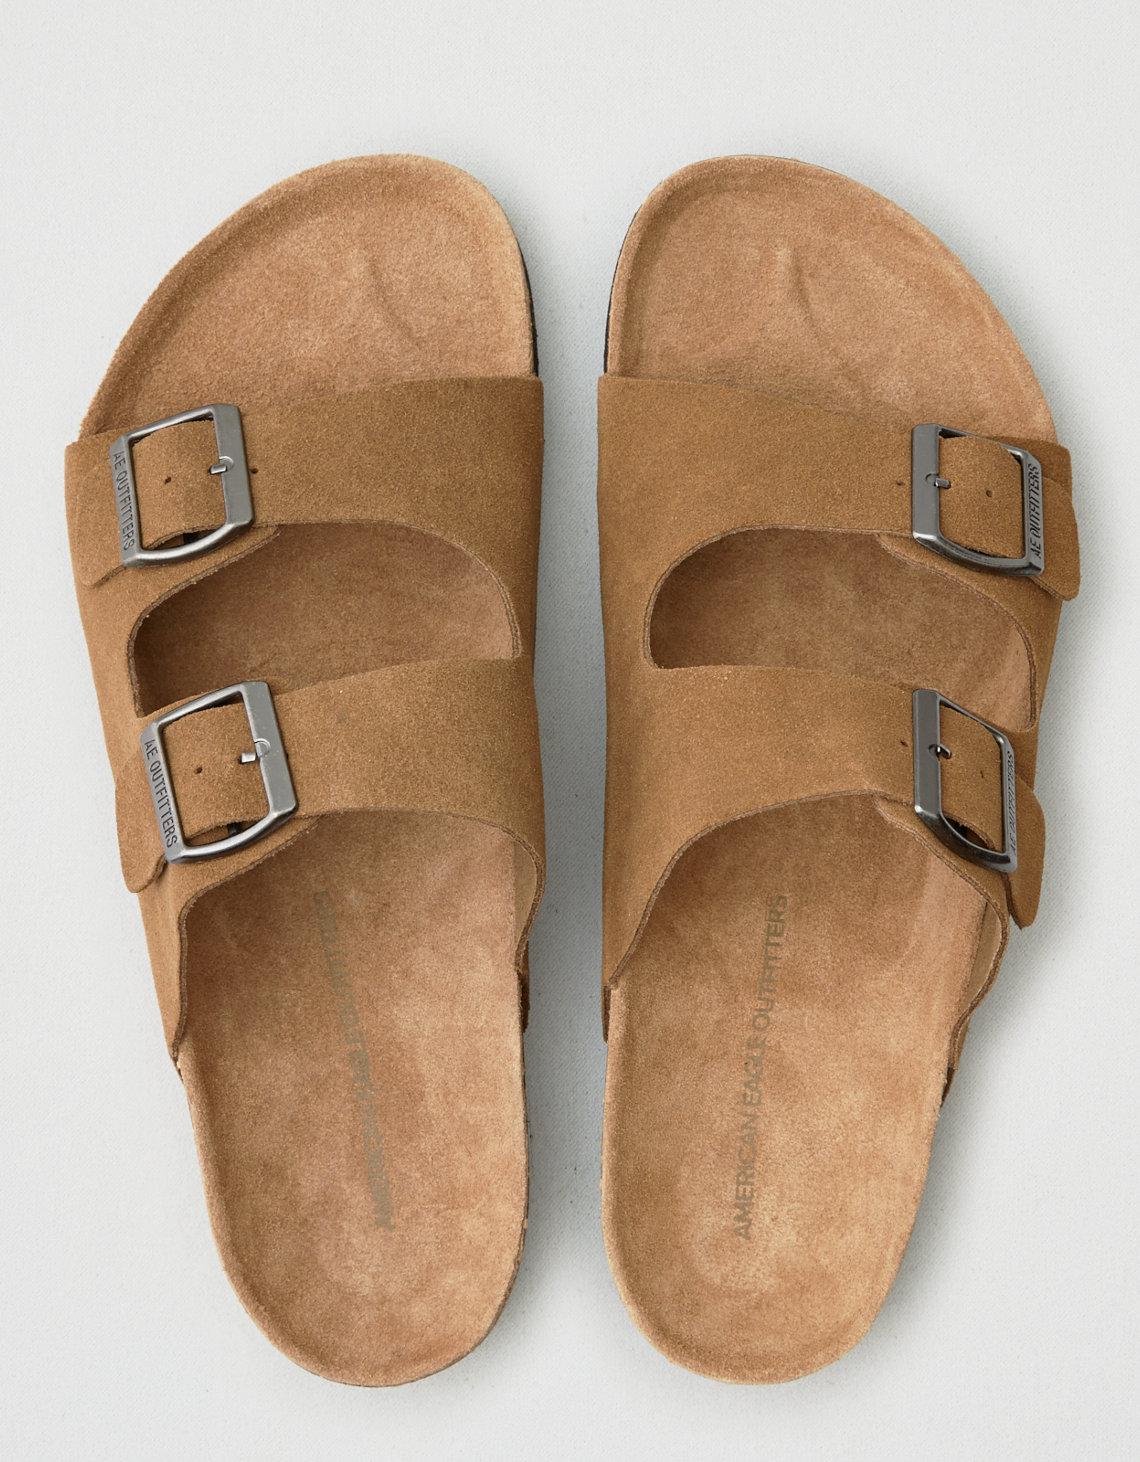 American Eagle Suede Double Buckle Sandal in Stone (Brown) for Men - Lyst